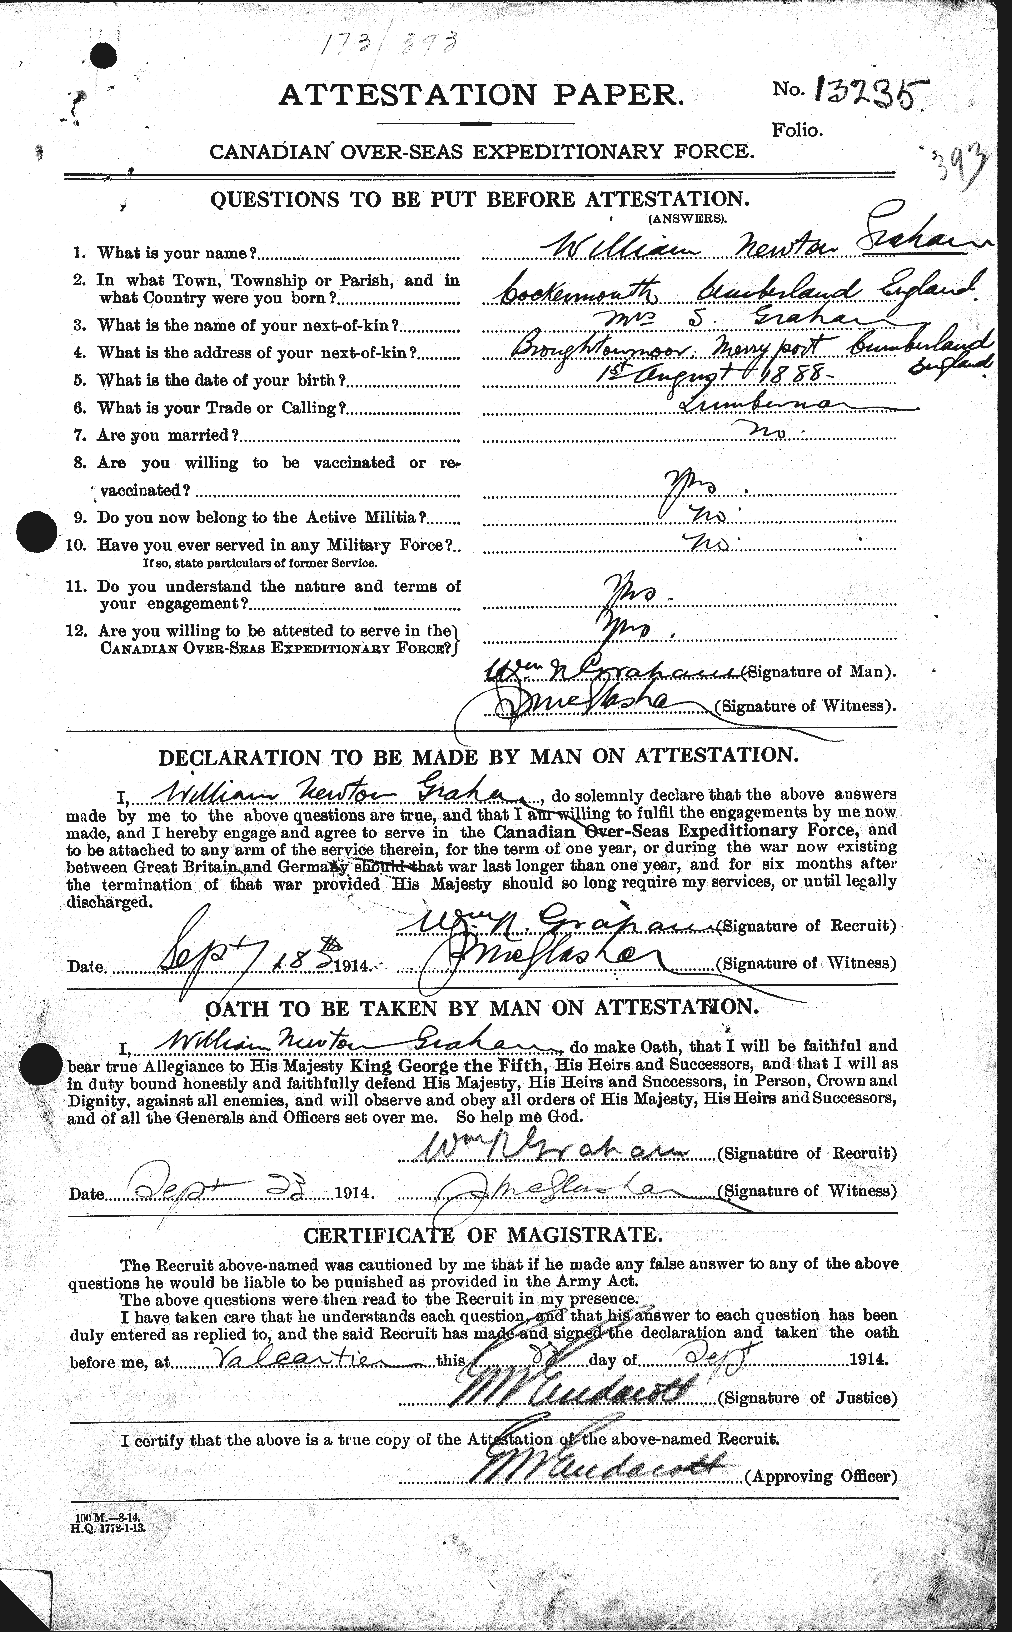 Personnel Records of the First World War - CEF 358027a